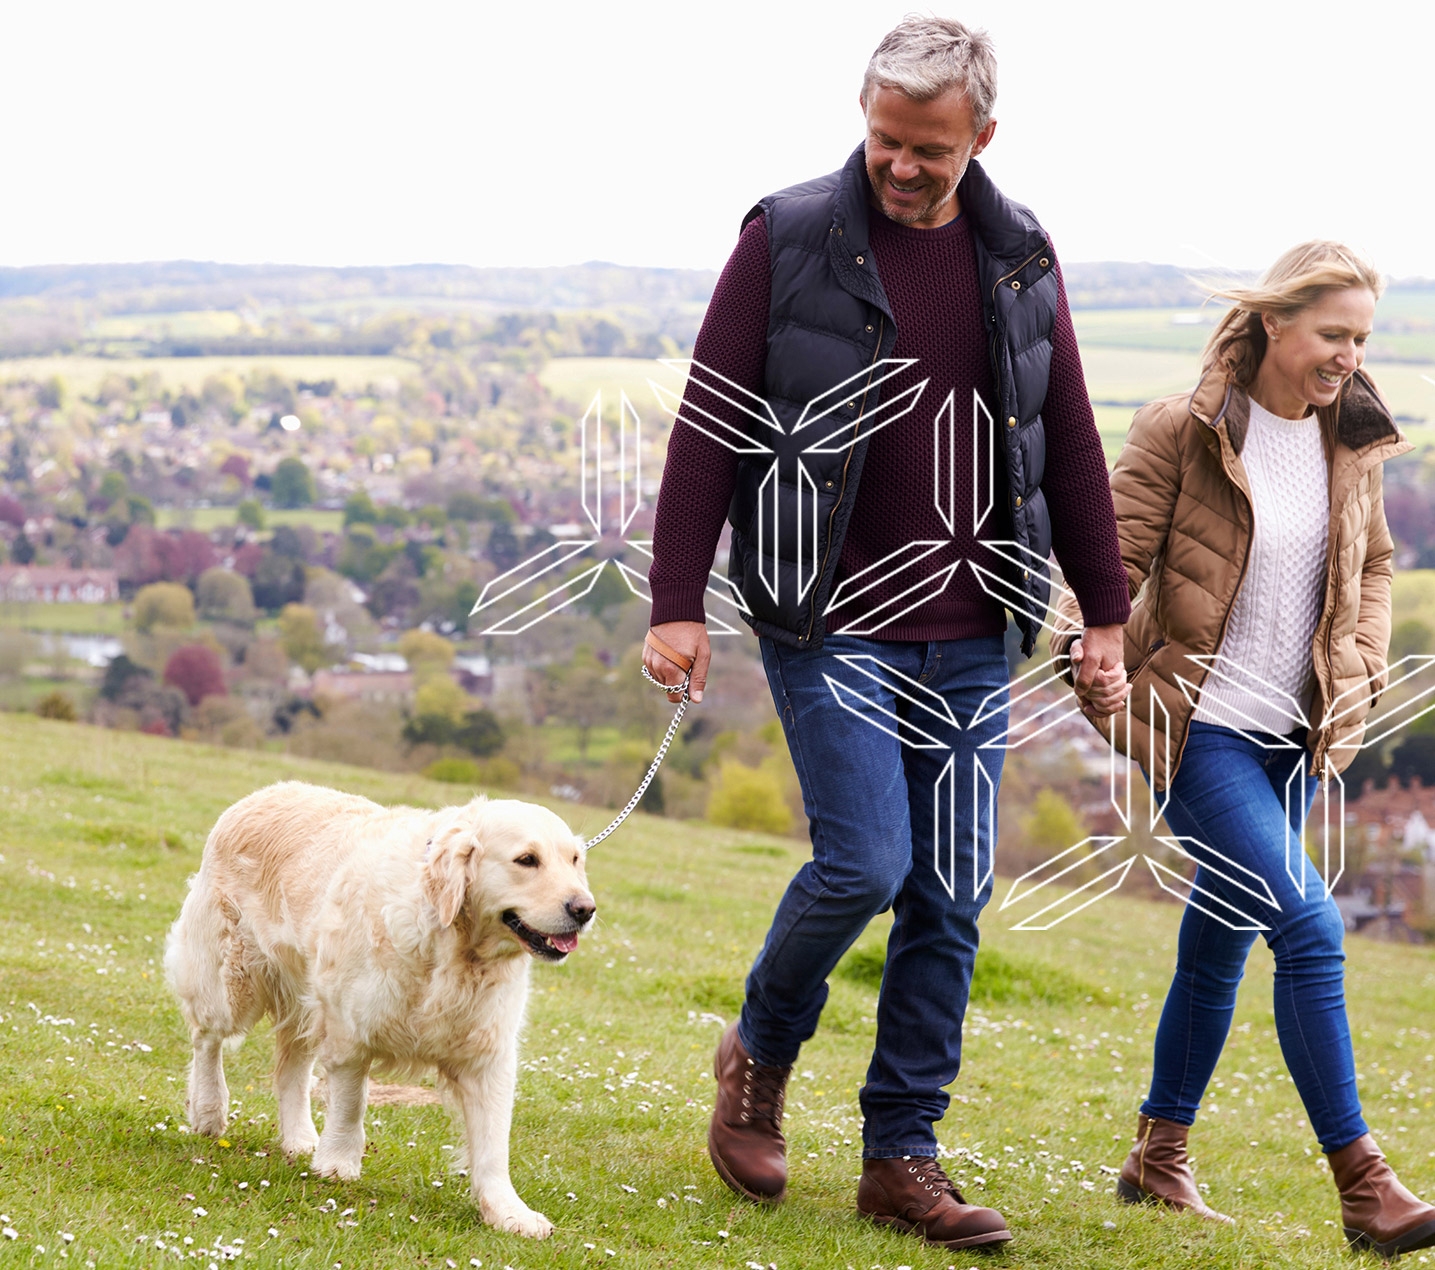 Man and woman wearing fall clothing walk golden retriever with mountains in background